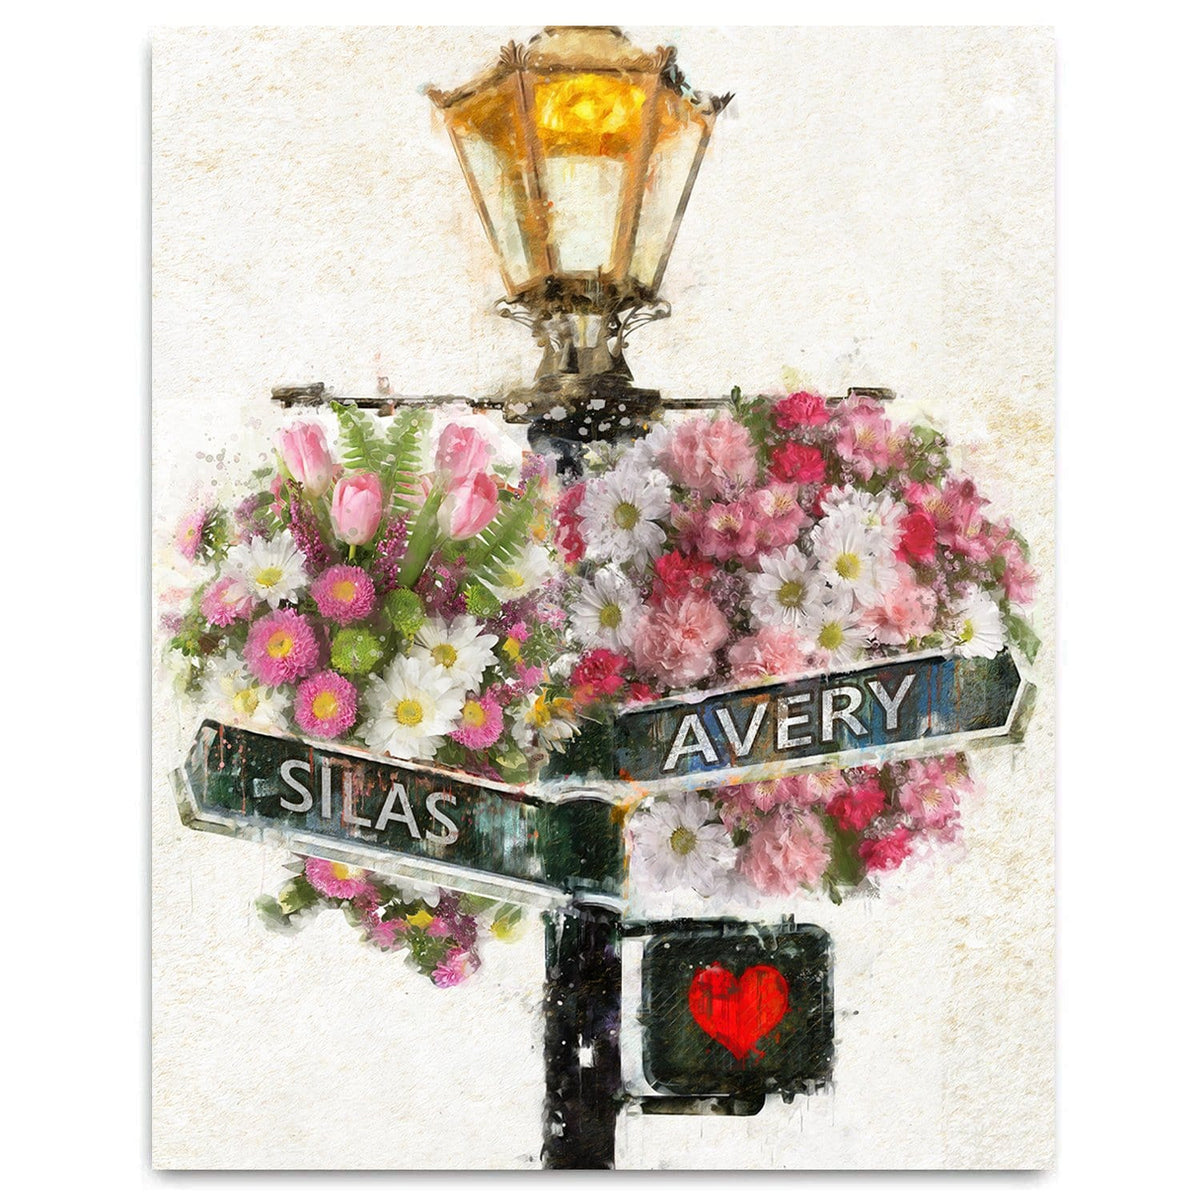 Personalized floral art - street sign decor from Personal Prints